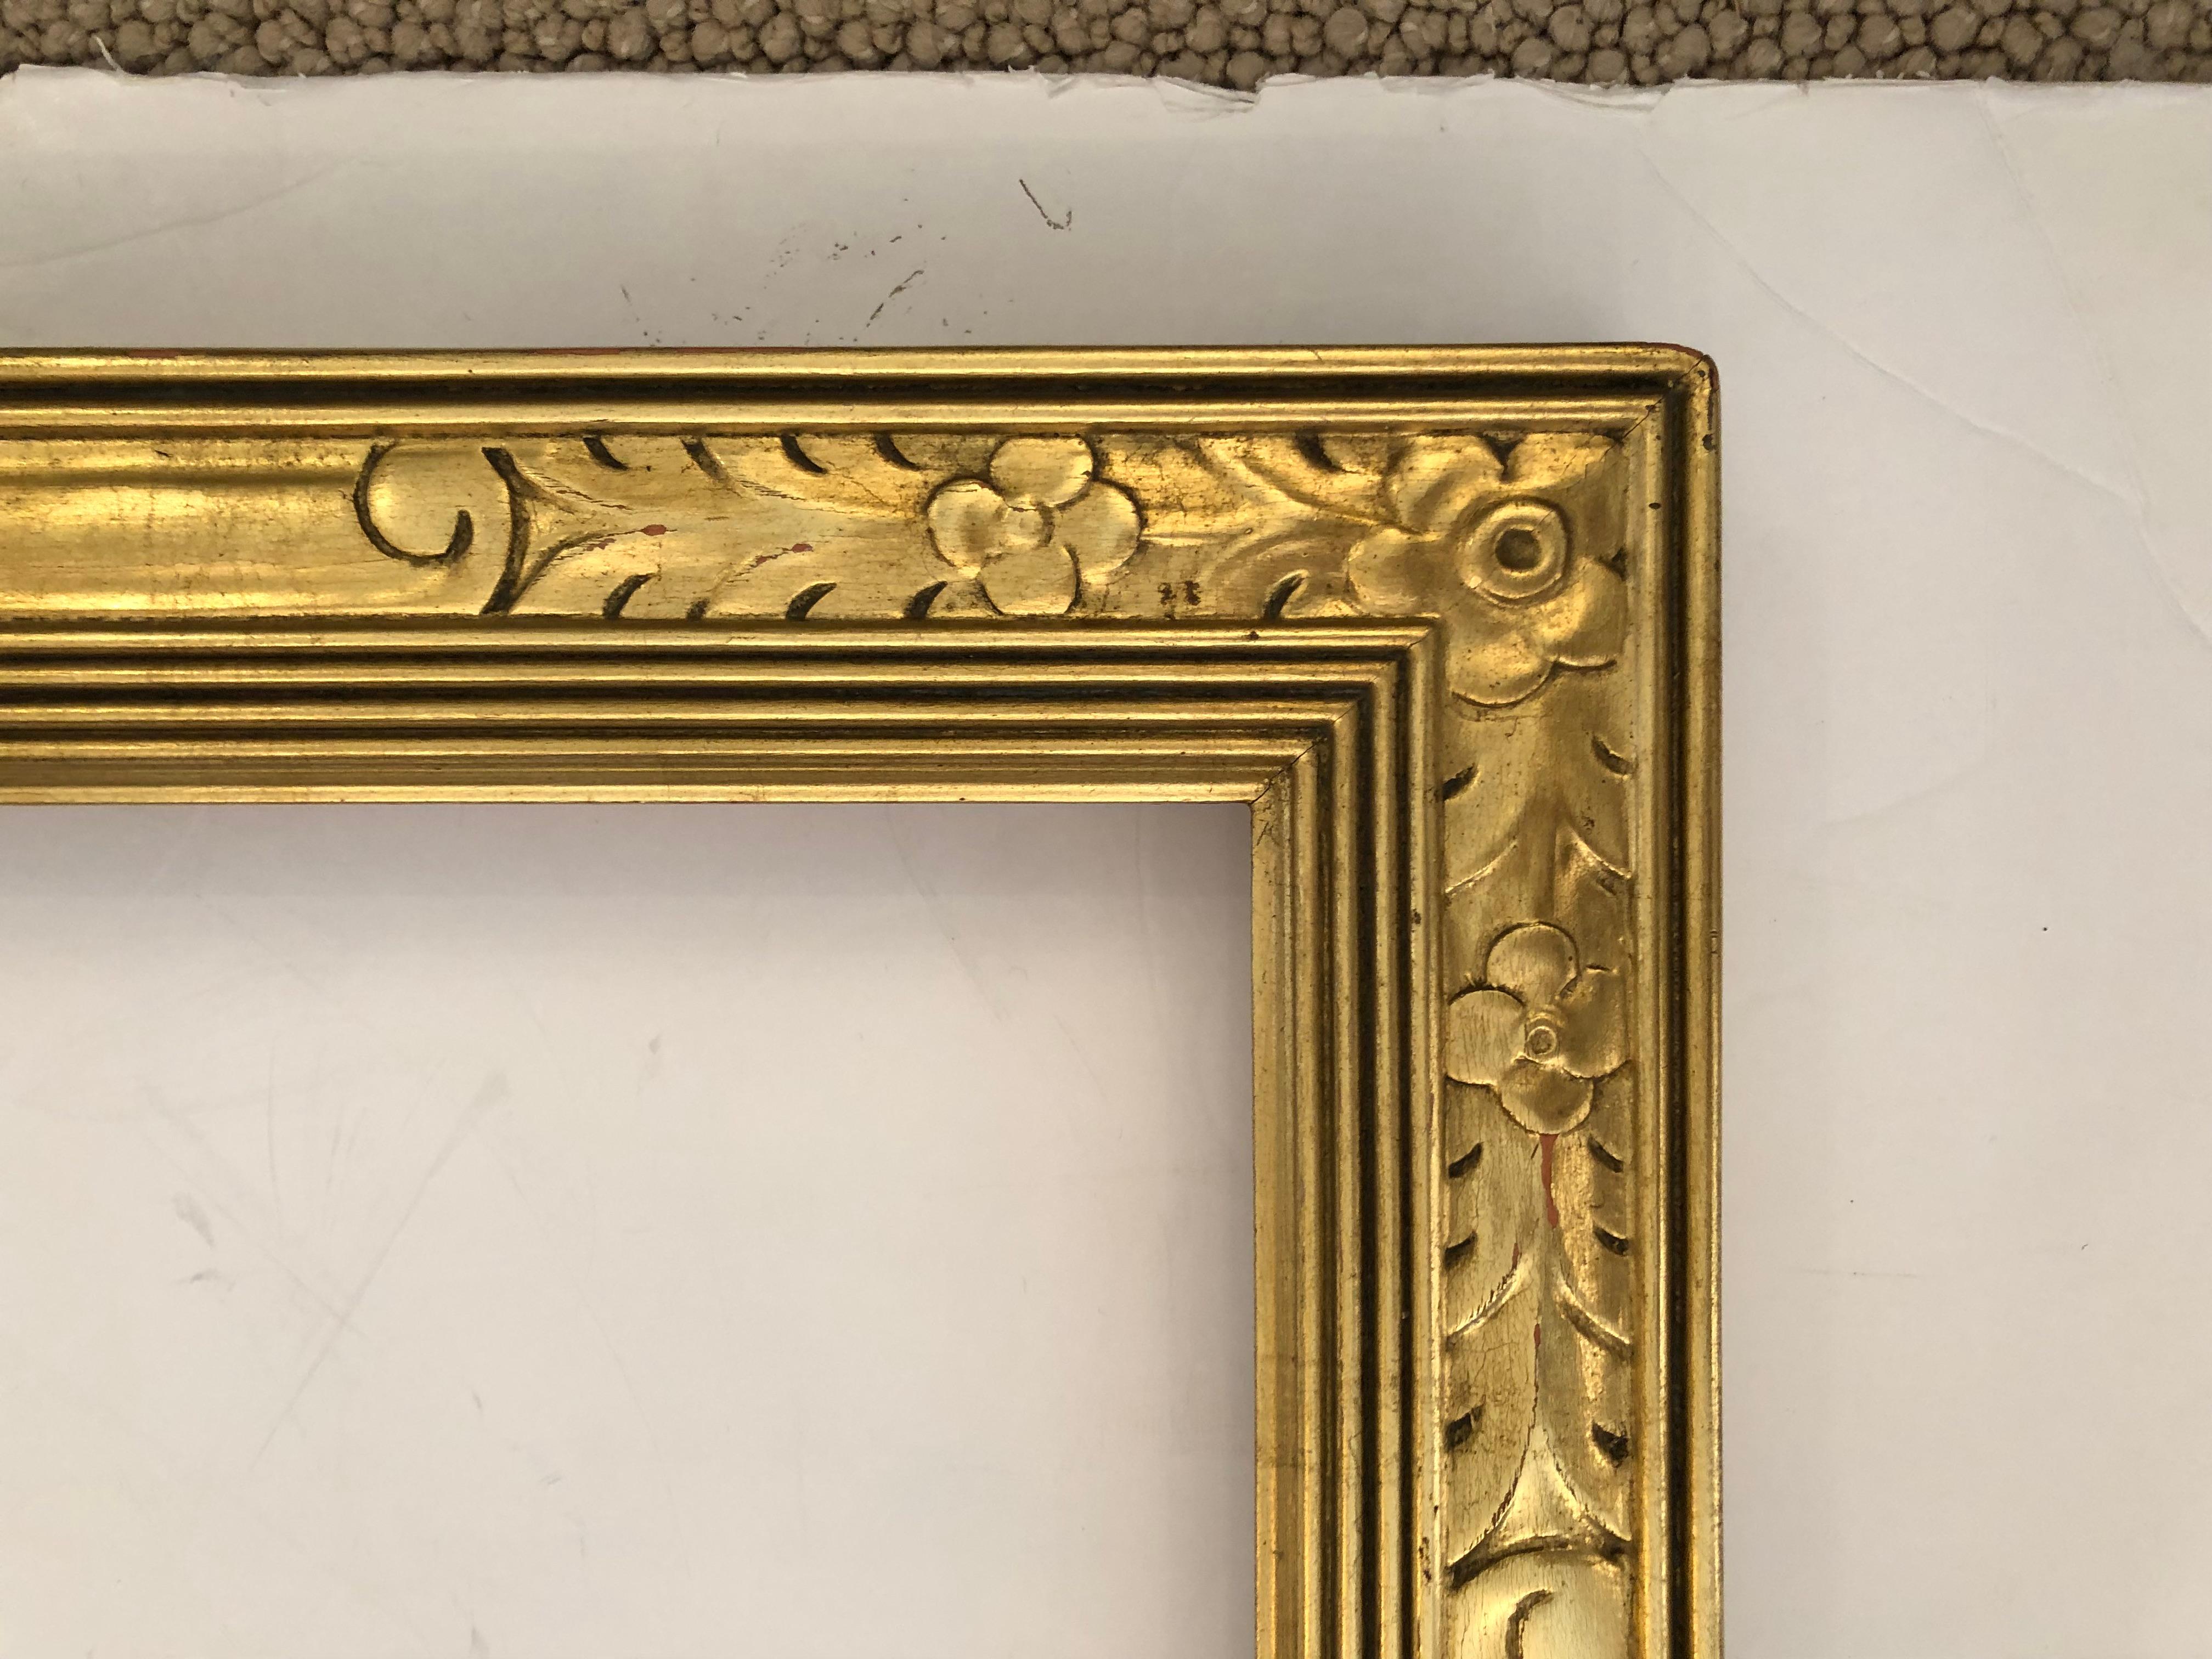 Large beautiful gilded Newcomb Macklin frame with an early Art Nouveau design.
Can be hung vertically or horizontally; would make a gorgeous mirror.

